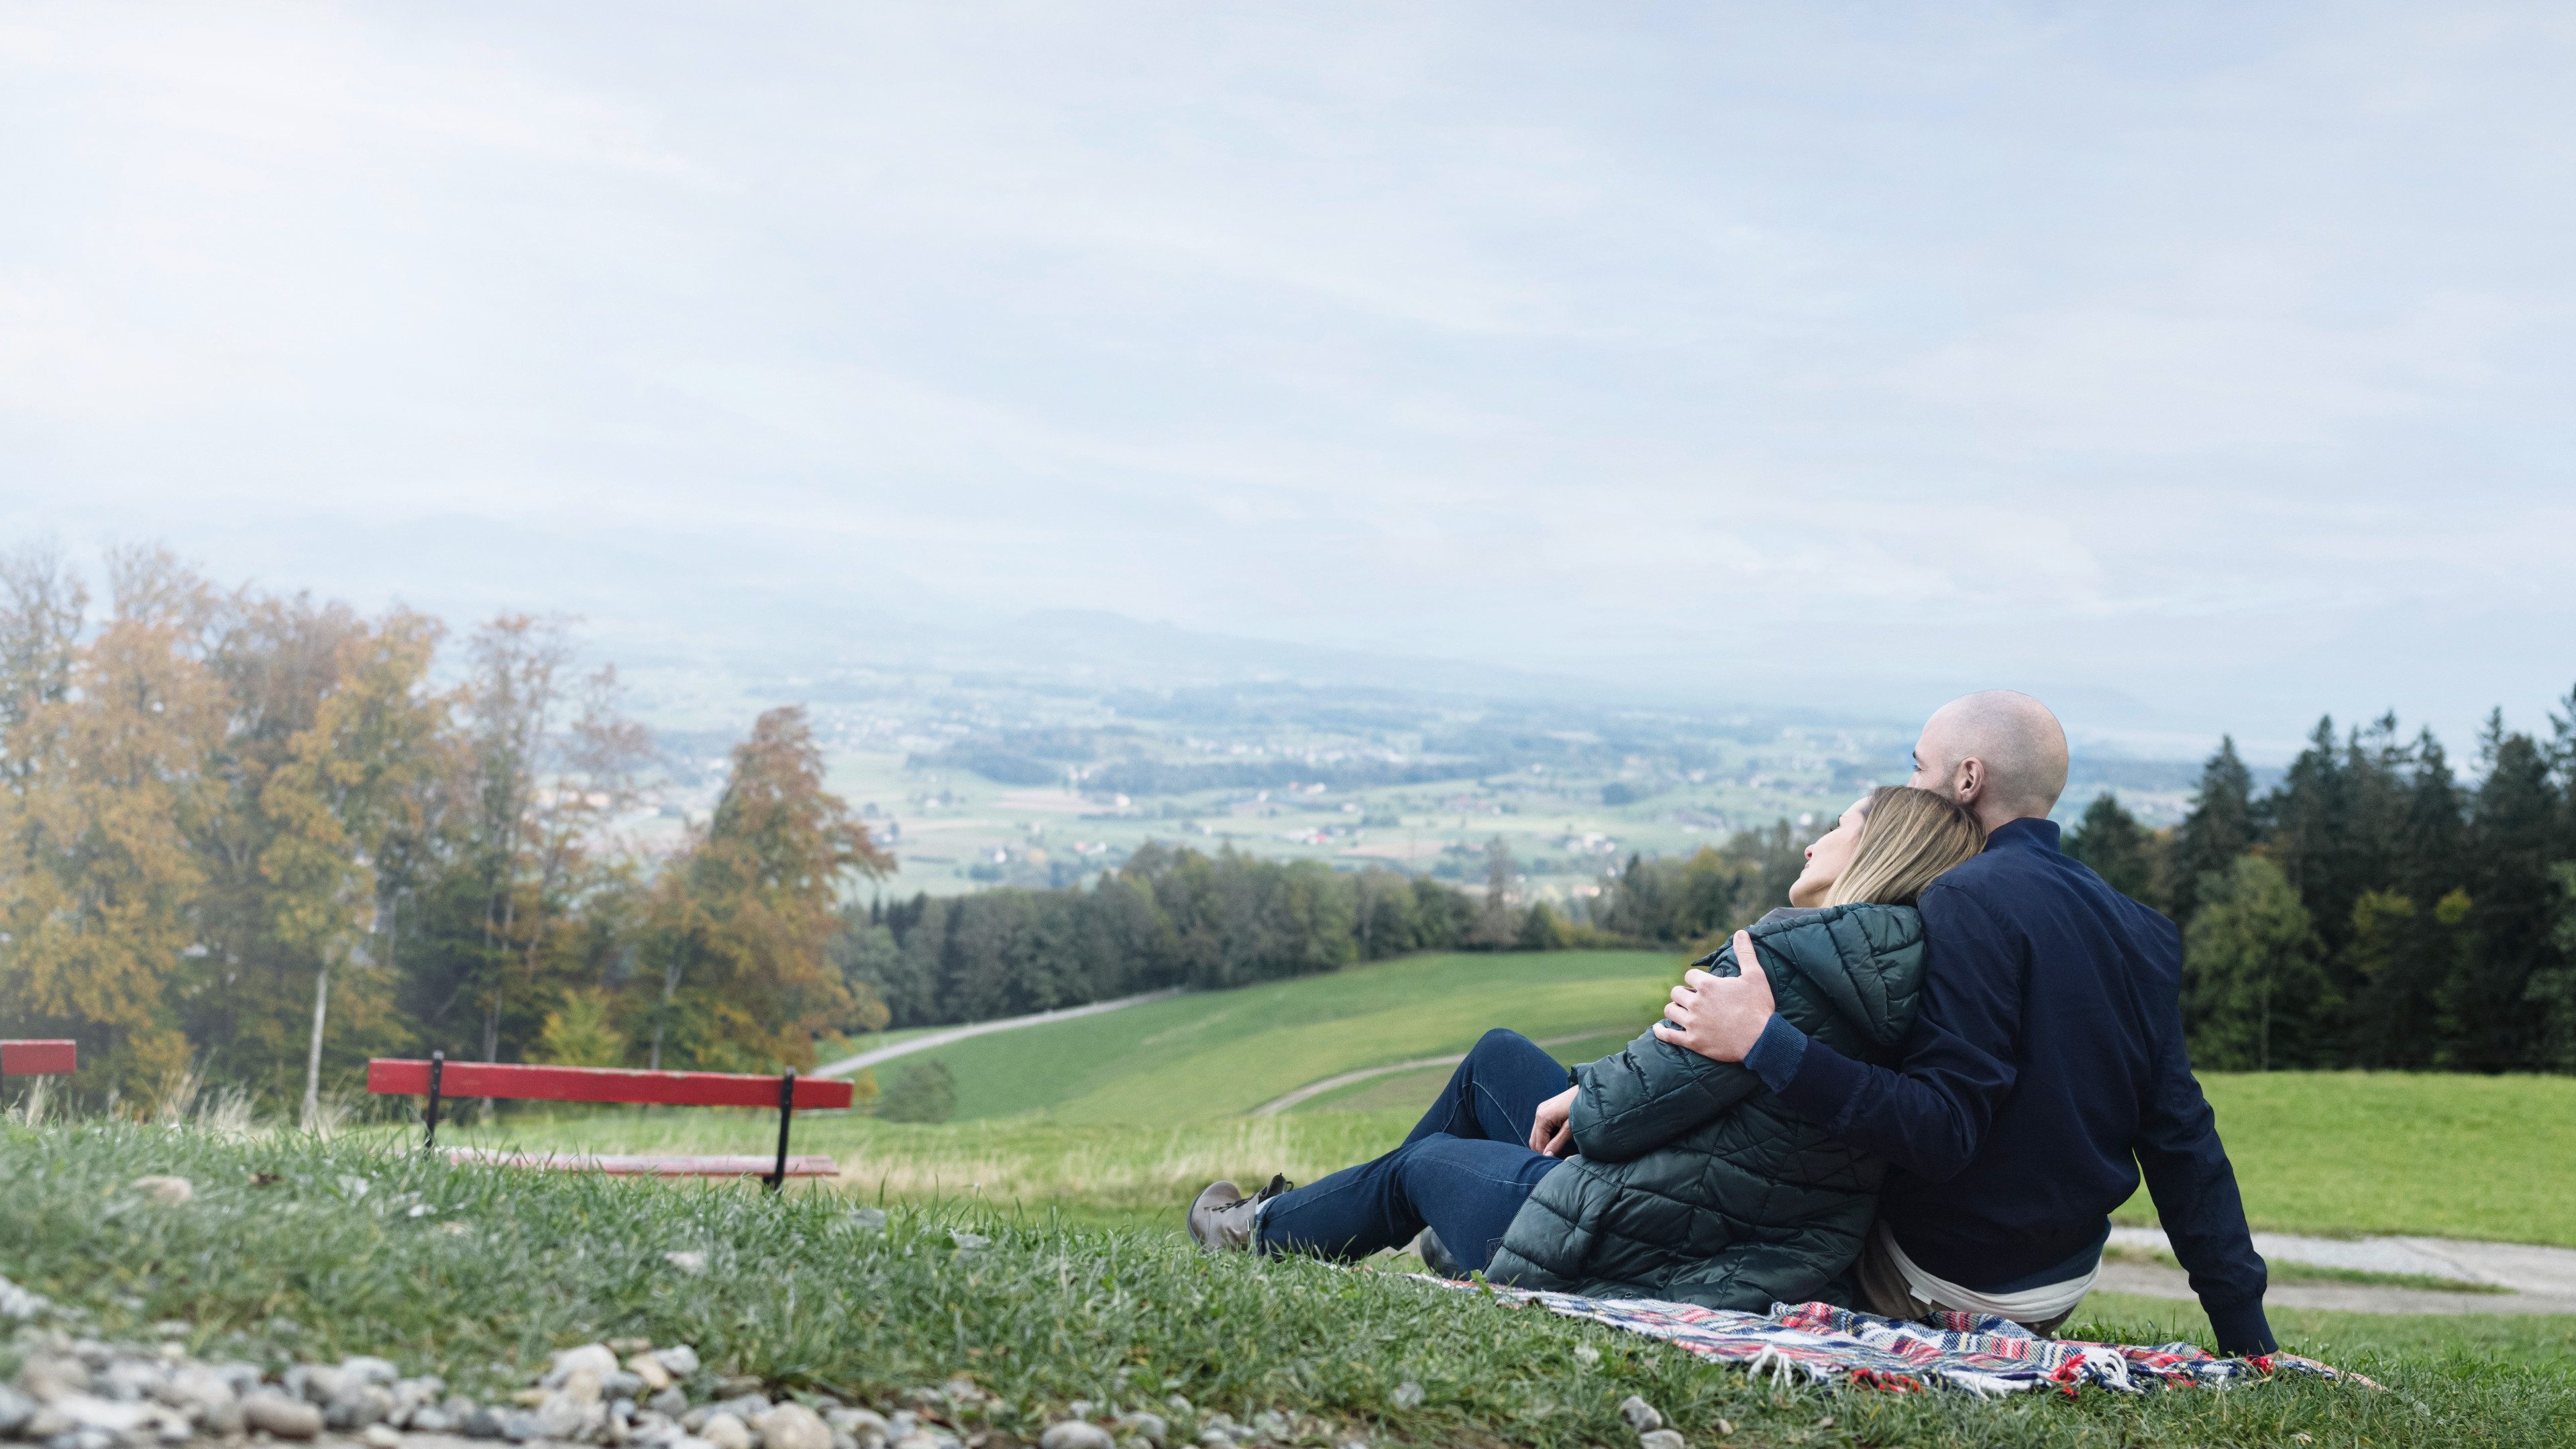 A man and a woman sitting on a blanket by the side of the road. The man has his arm around the woman. They both look at a wooded valley.